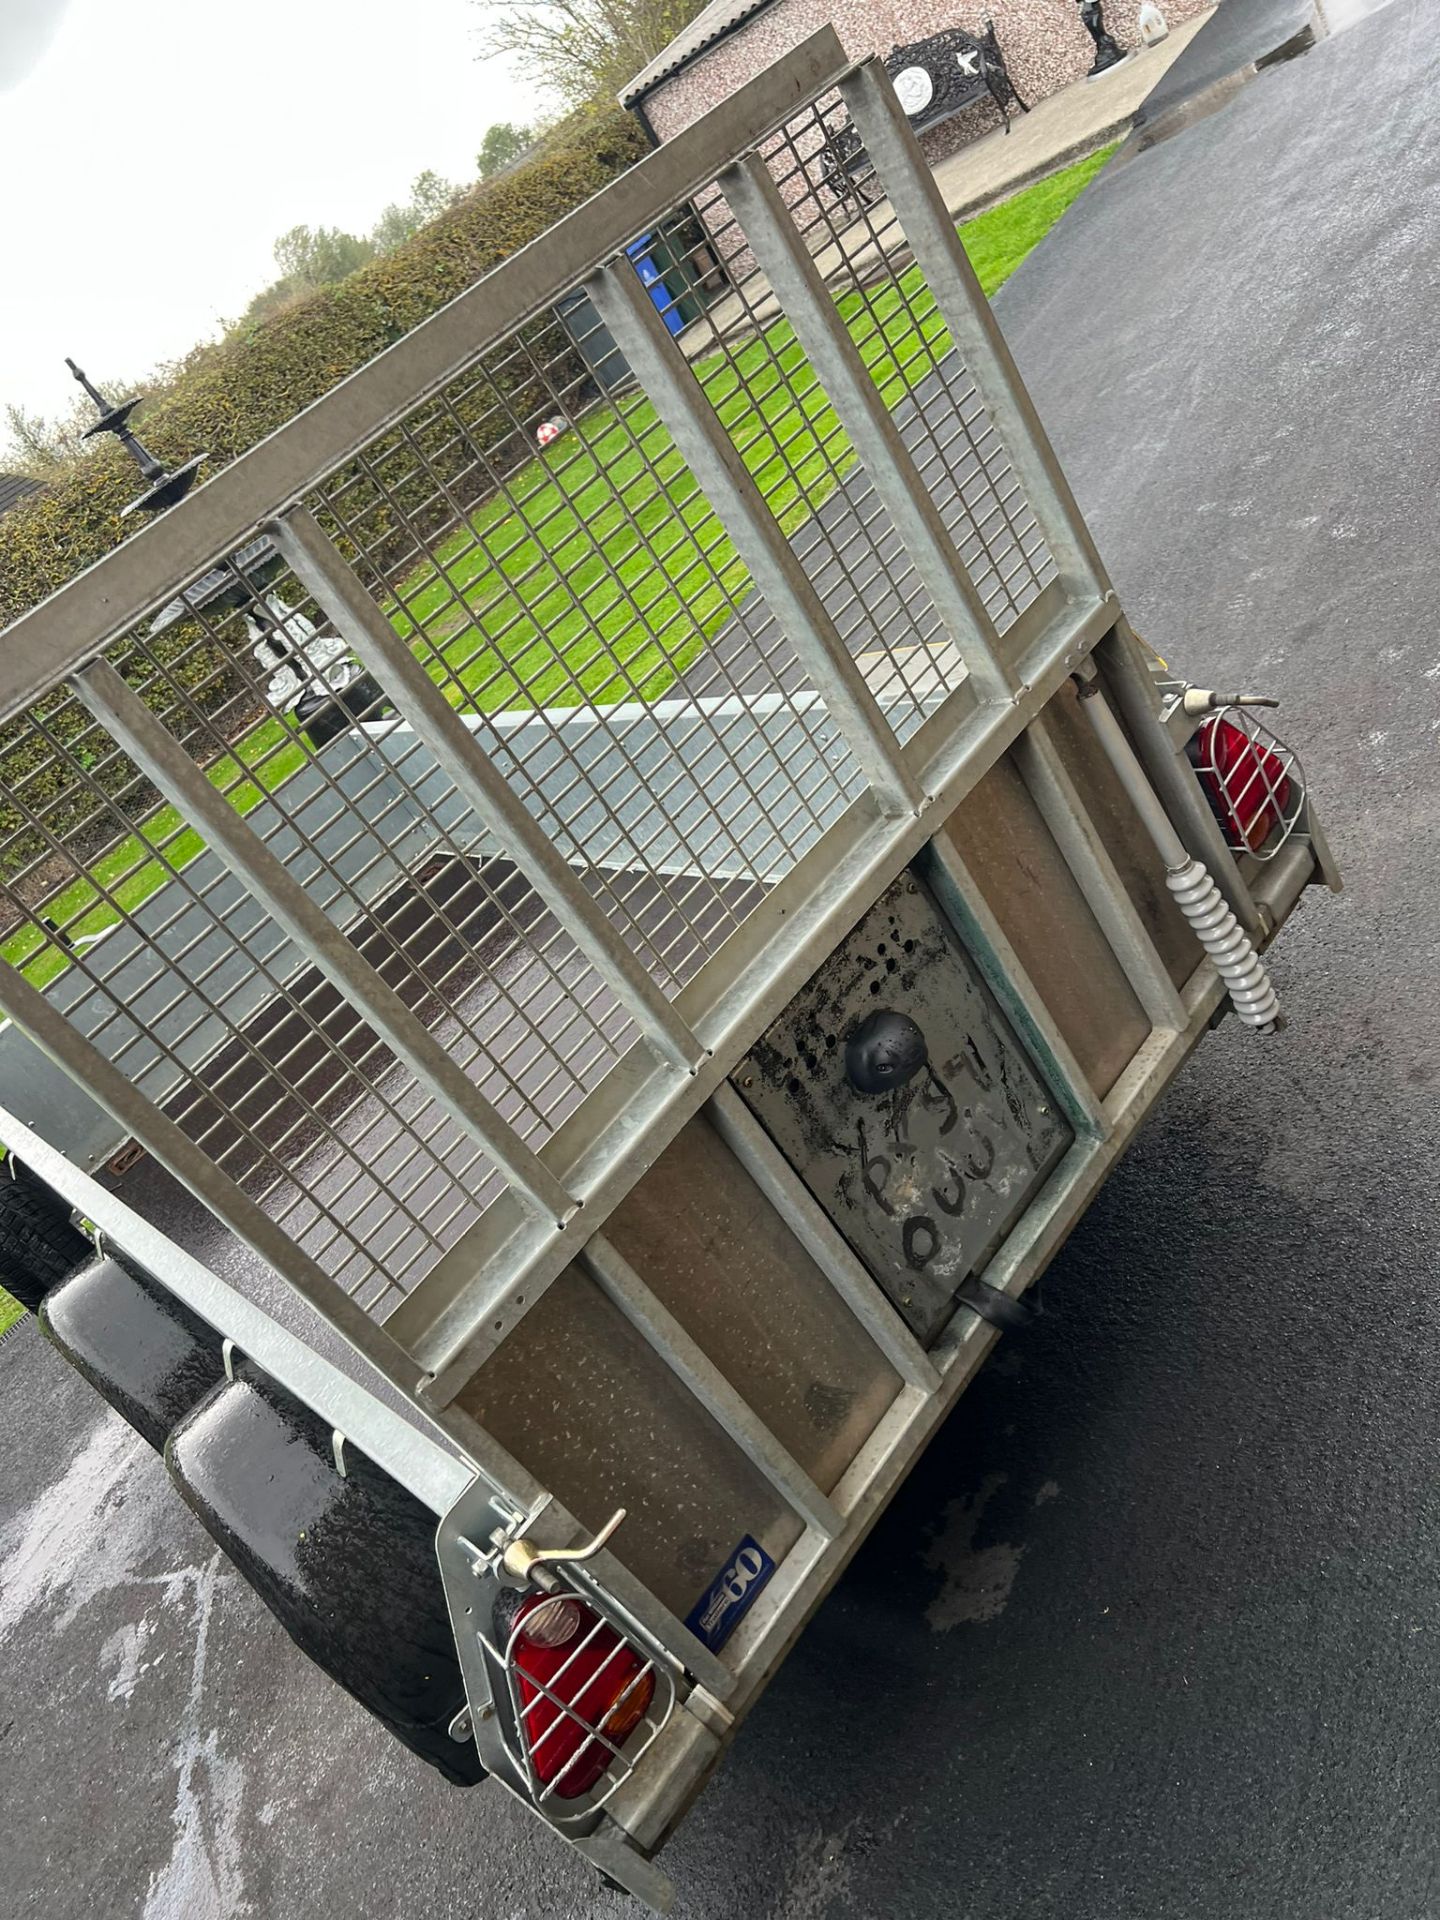 Ifor Williams GD84 Trailer - Year 2018 - Drop down ramp - good tyres all around - Image 7 of 10